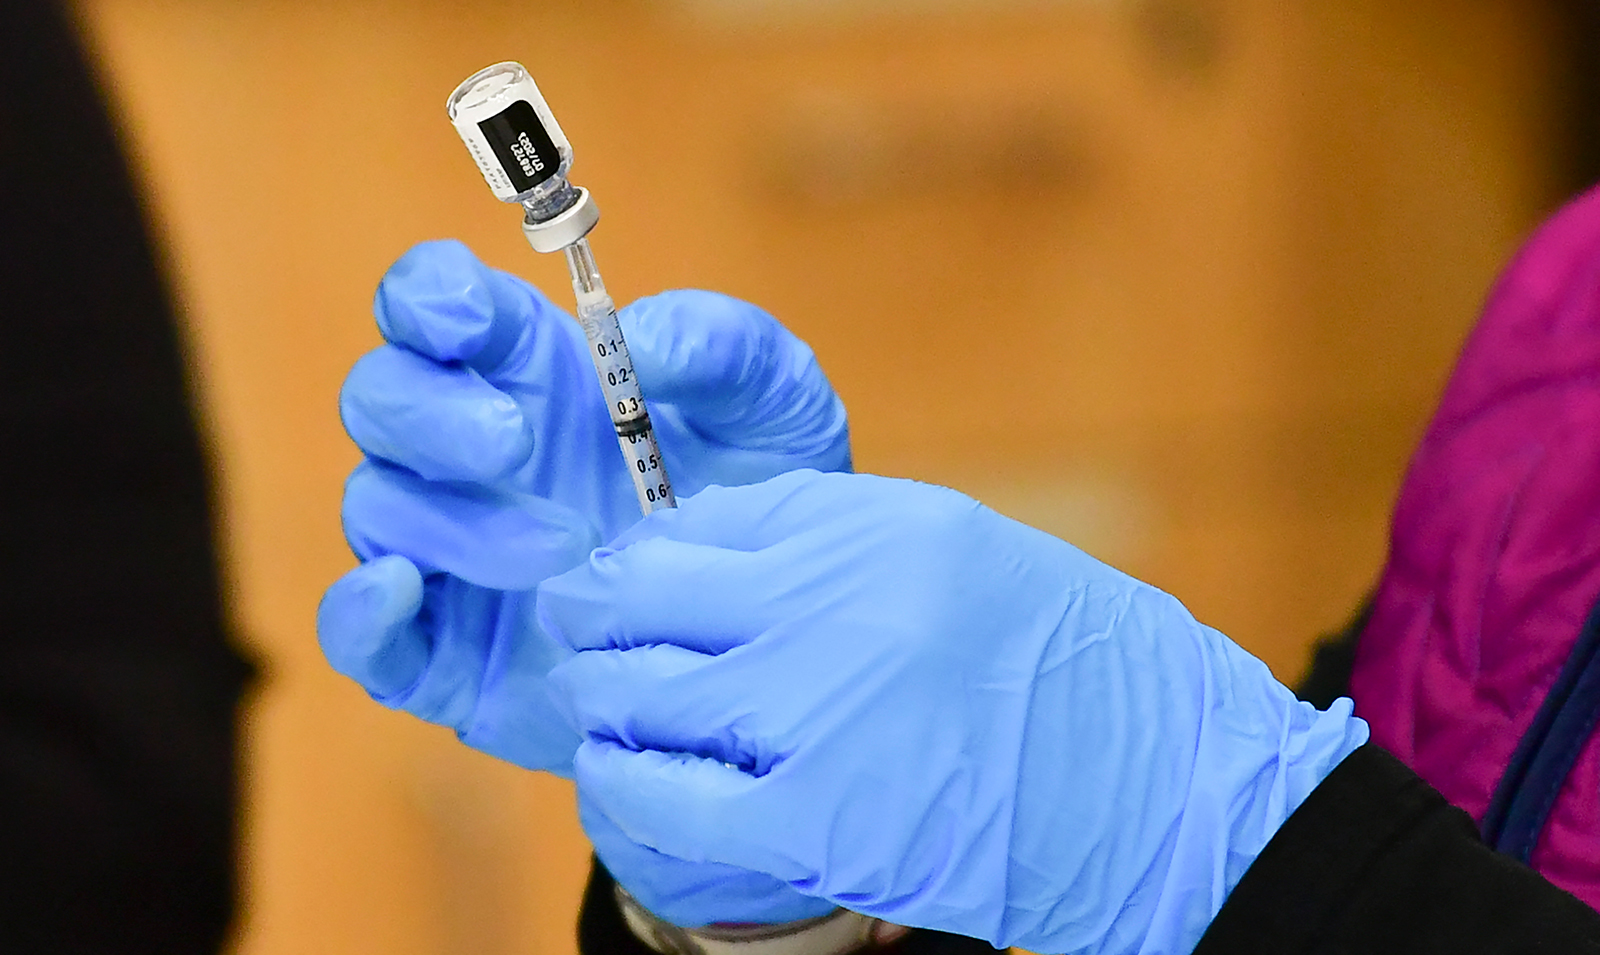 A nurse loads a syringe with a dose of the Pfizer Covid-19 vaccine at the Blood Bank of Alaska in Anchorage, on March 19